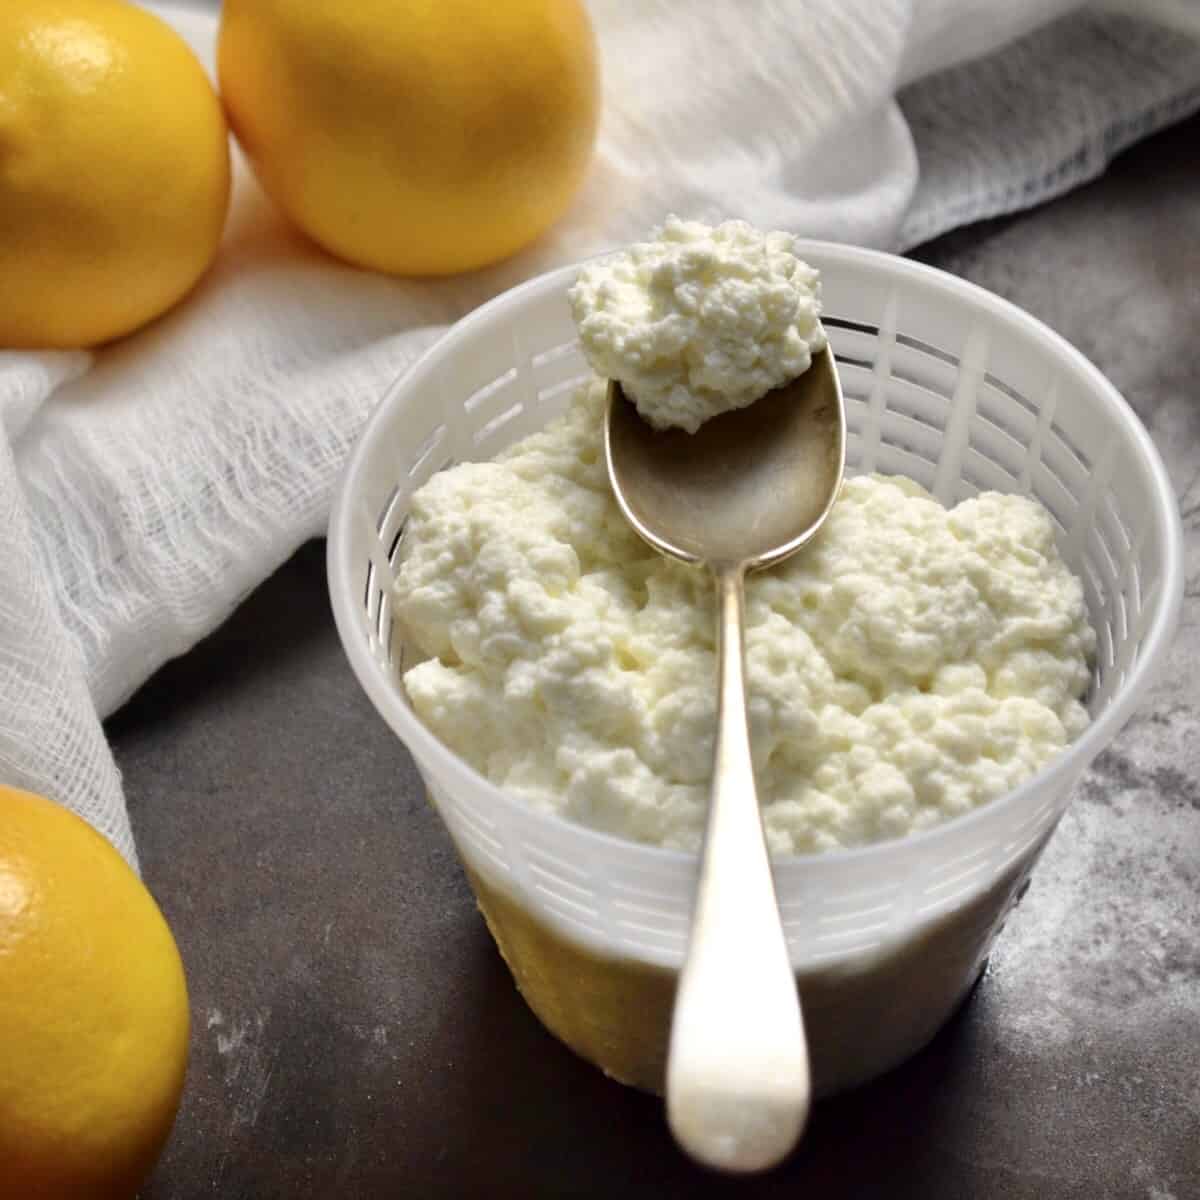 A spoon of homemade ricotta on a cheese basket.